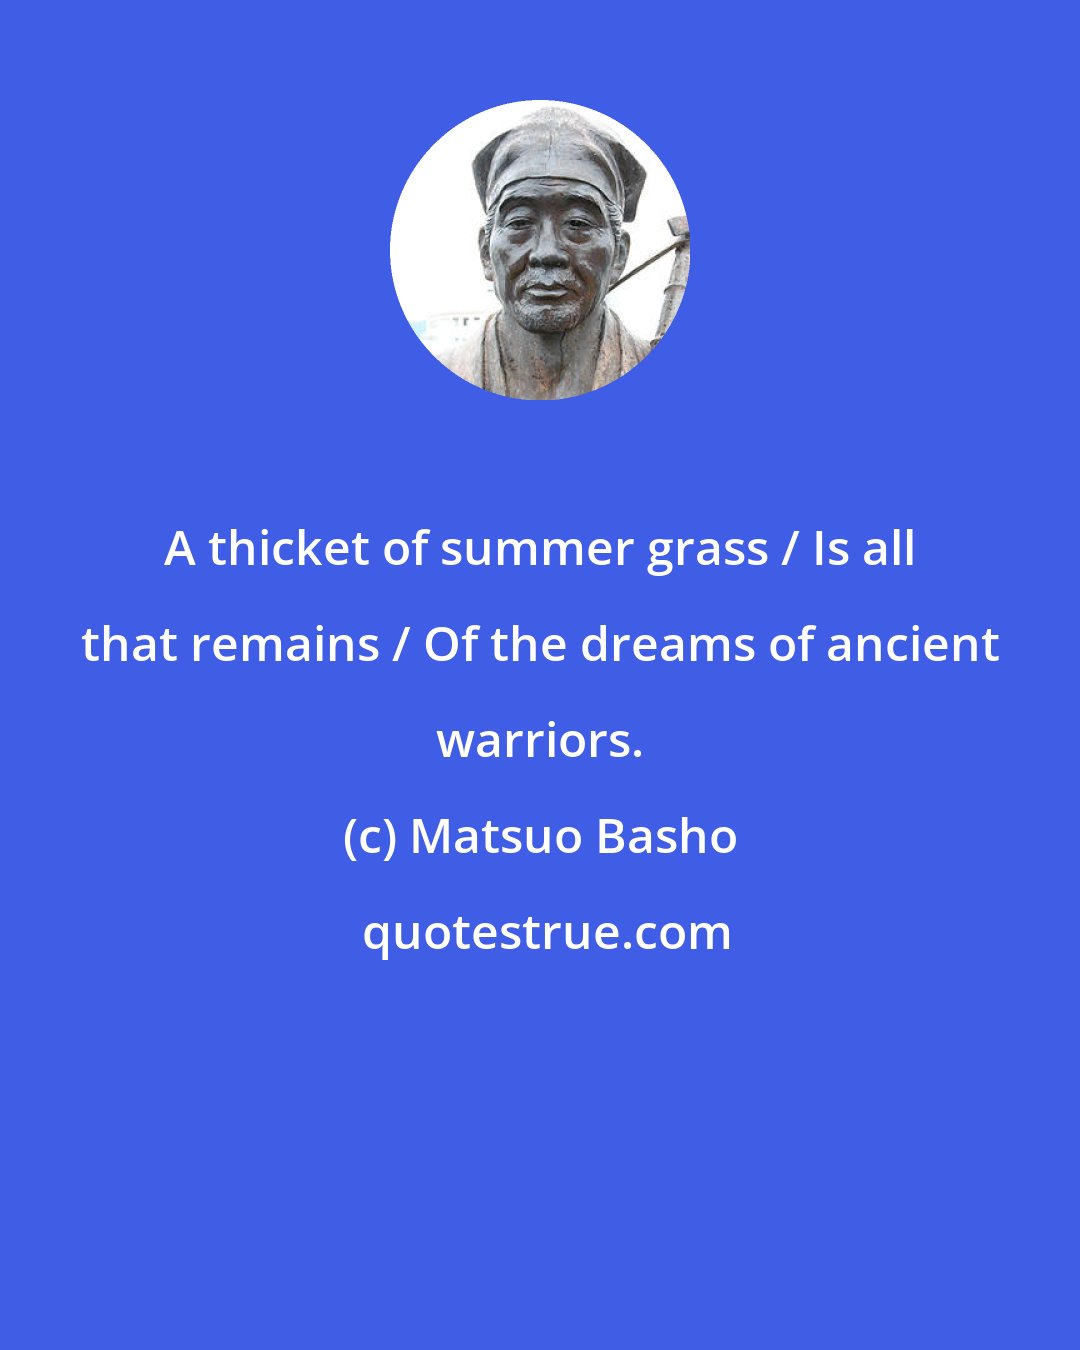 Matsuo Basho: A thicket of summer grass / Is all that remains / Of the dreams of ancient warriors.